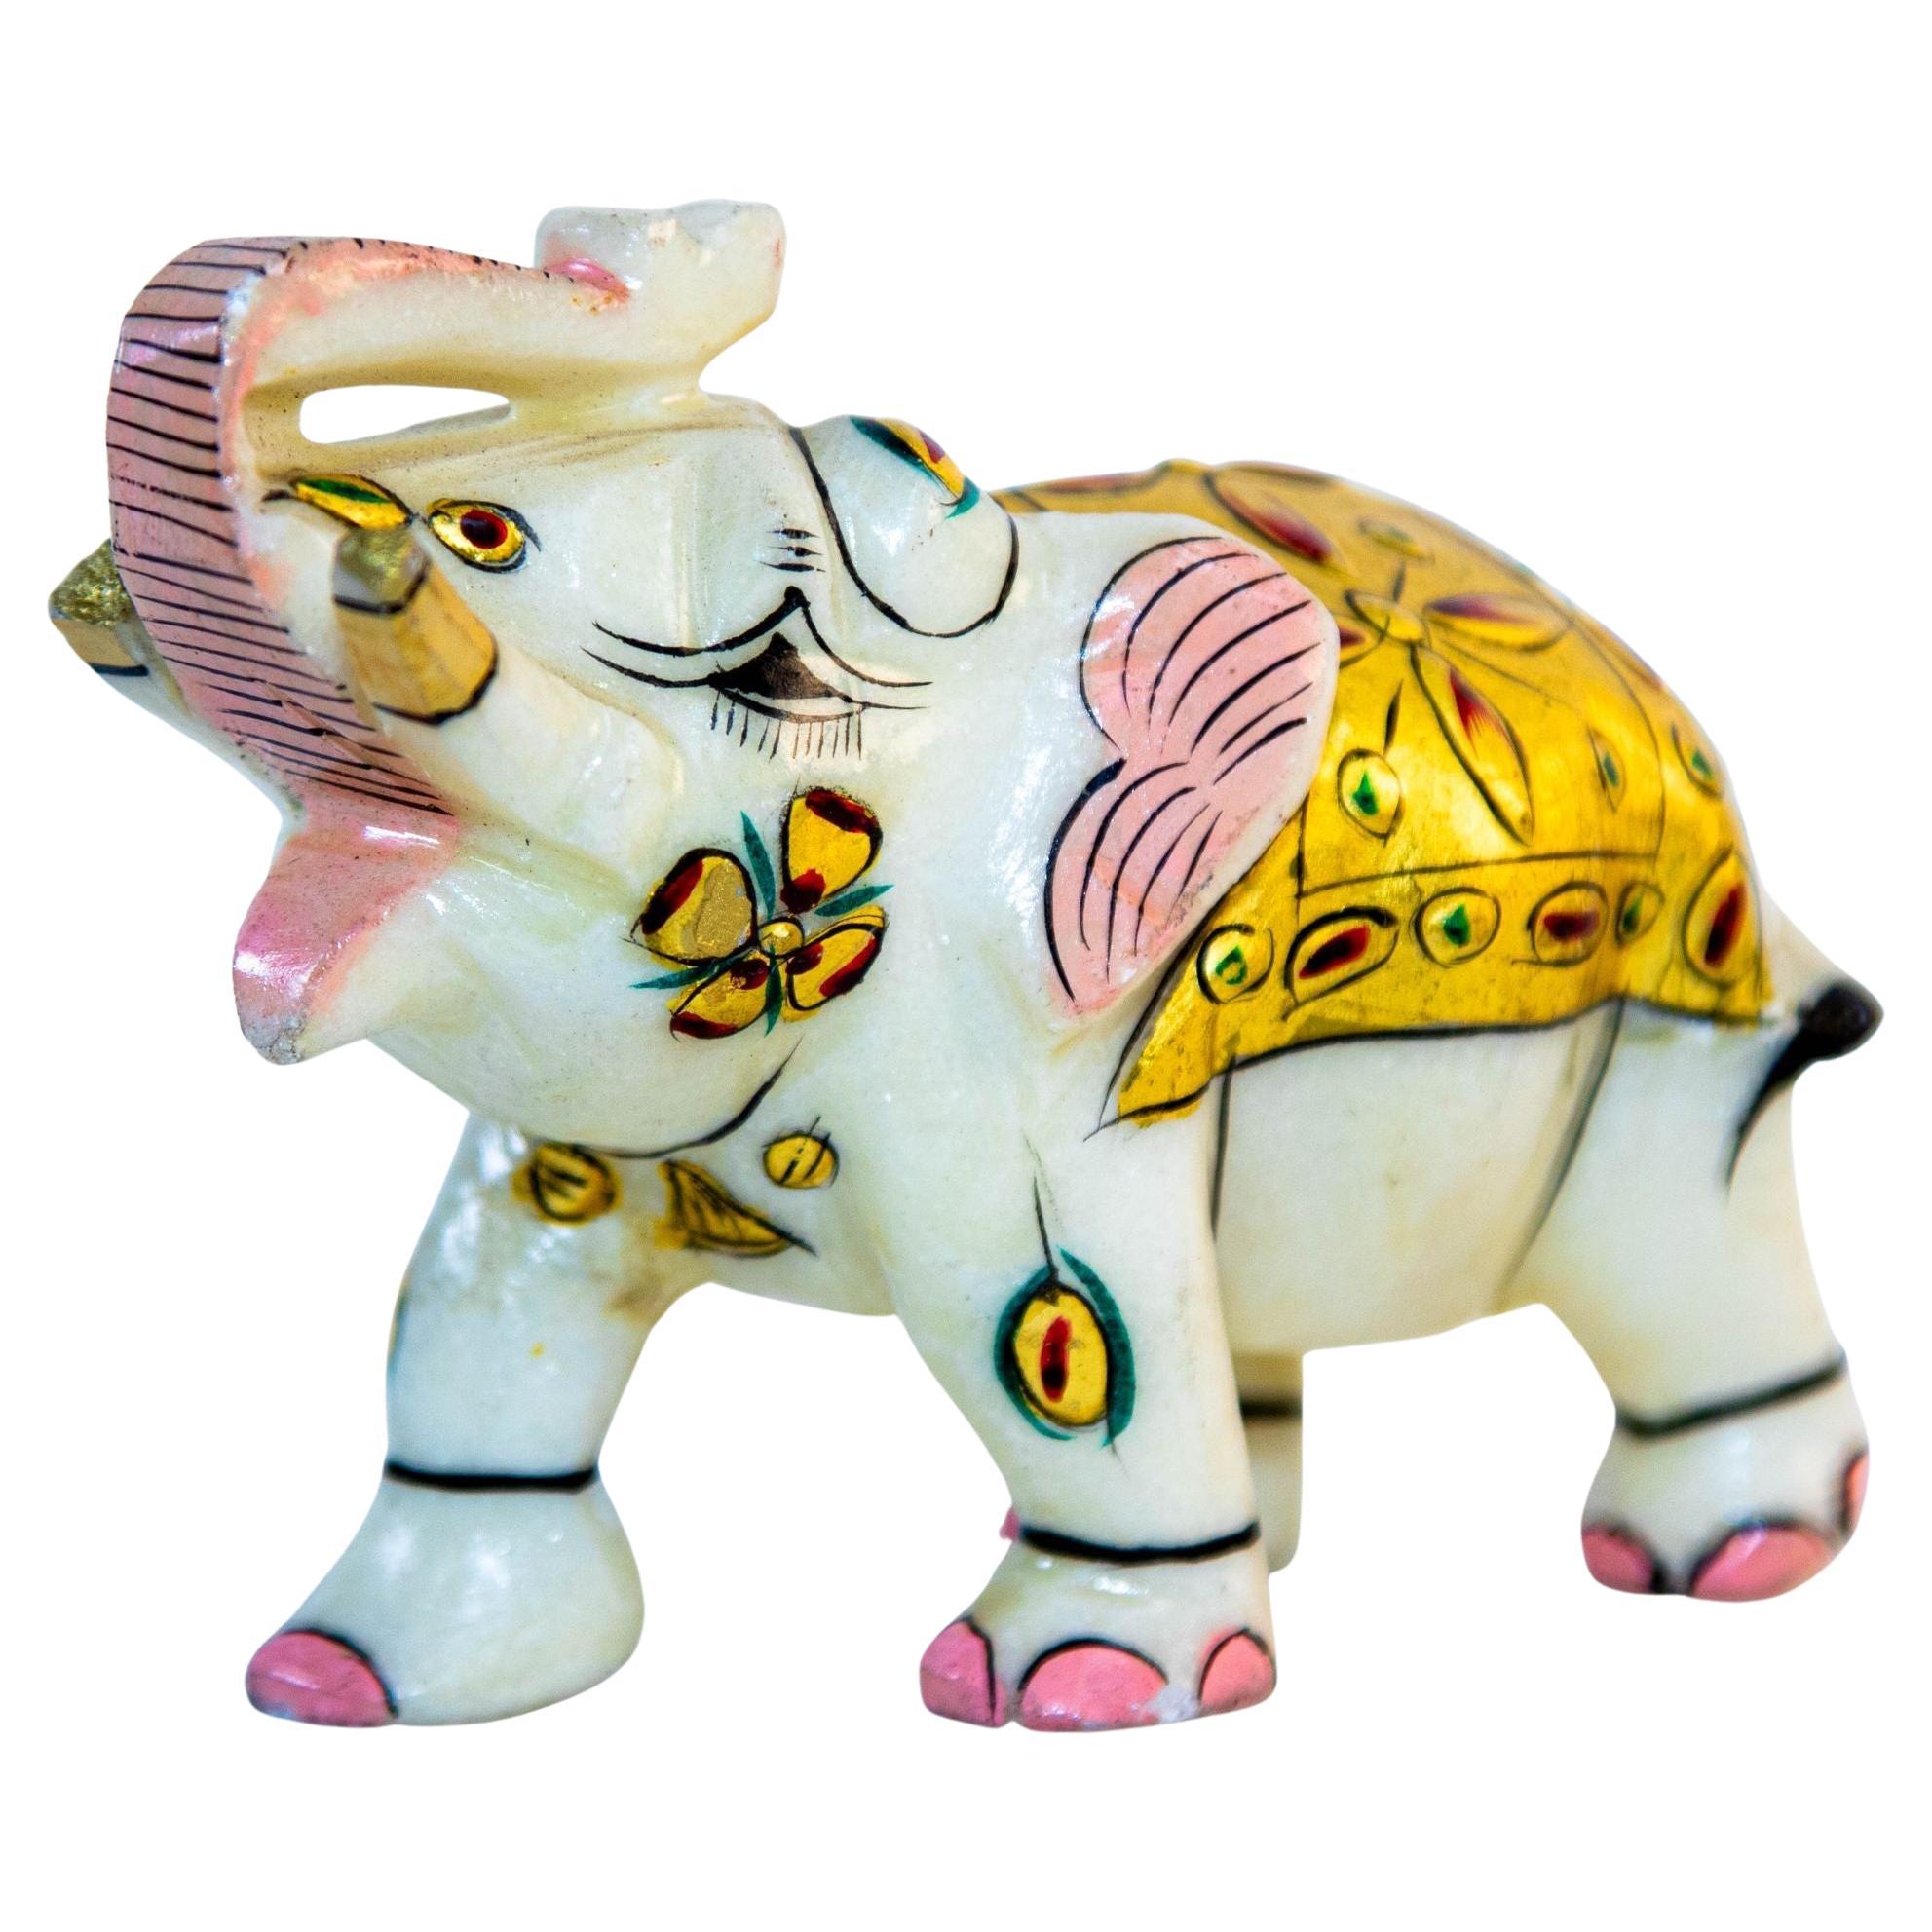 Vintage White Marble Mughal Jeweled Elephant Sculpture Paper Weight For Sale